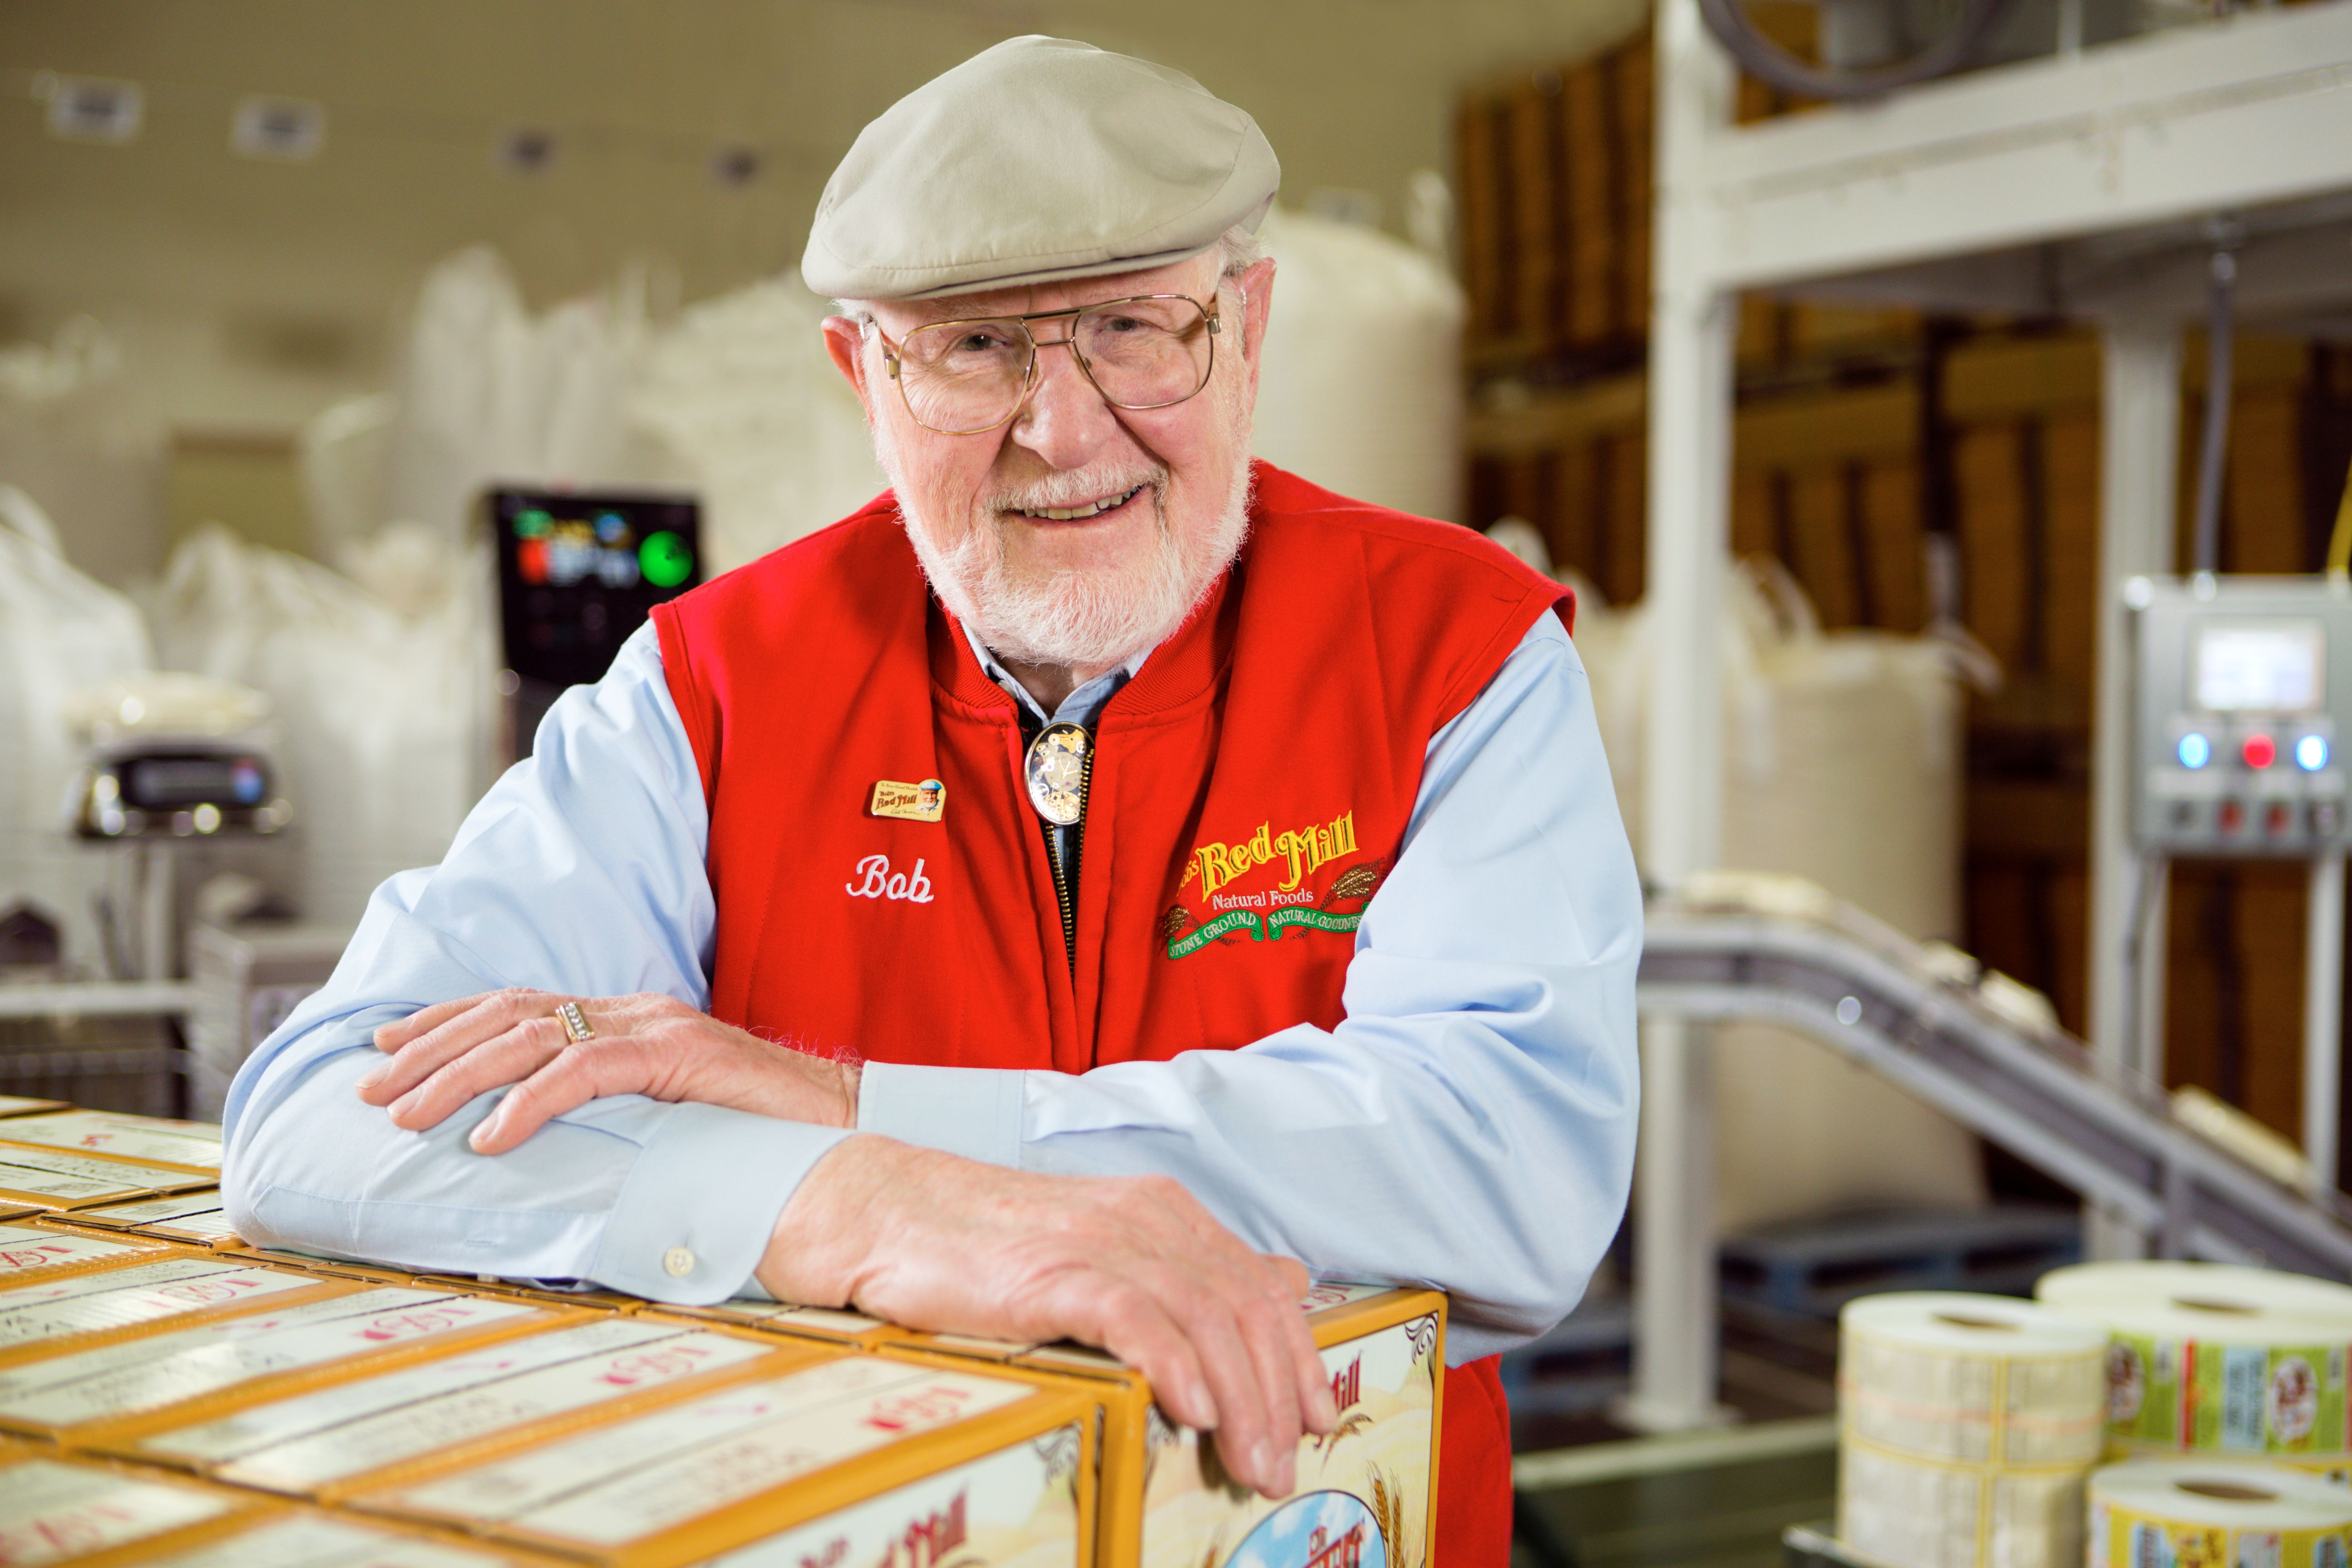 Bob Moore leaning on boxes of Bob's Red Mill products